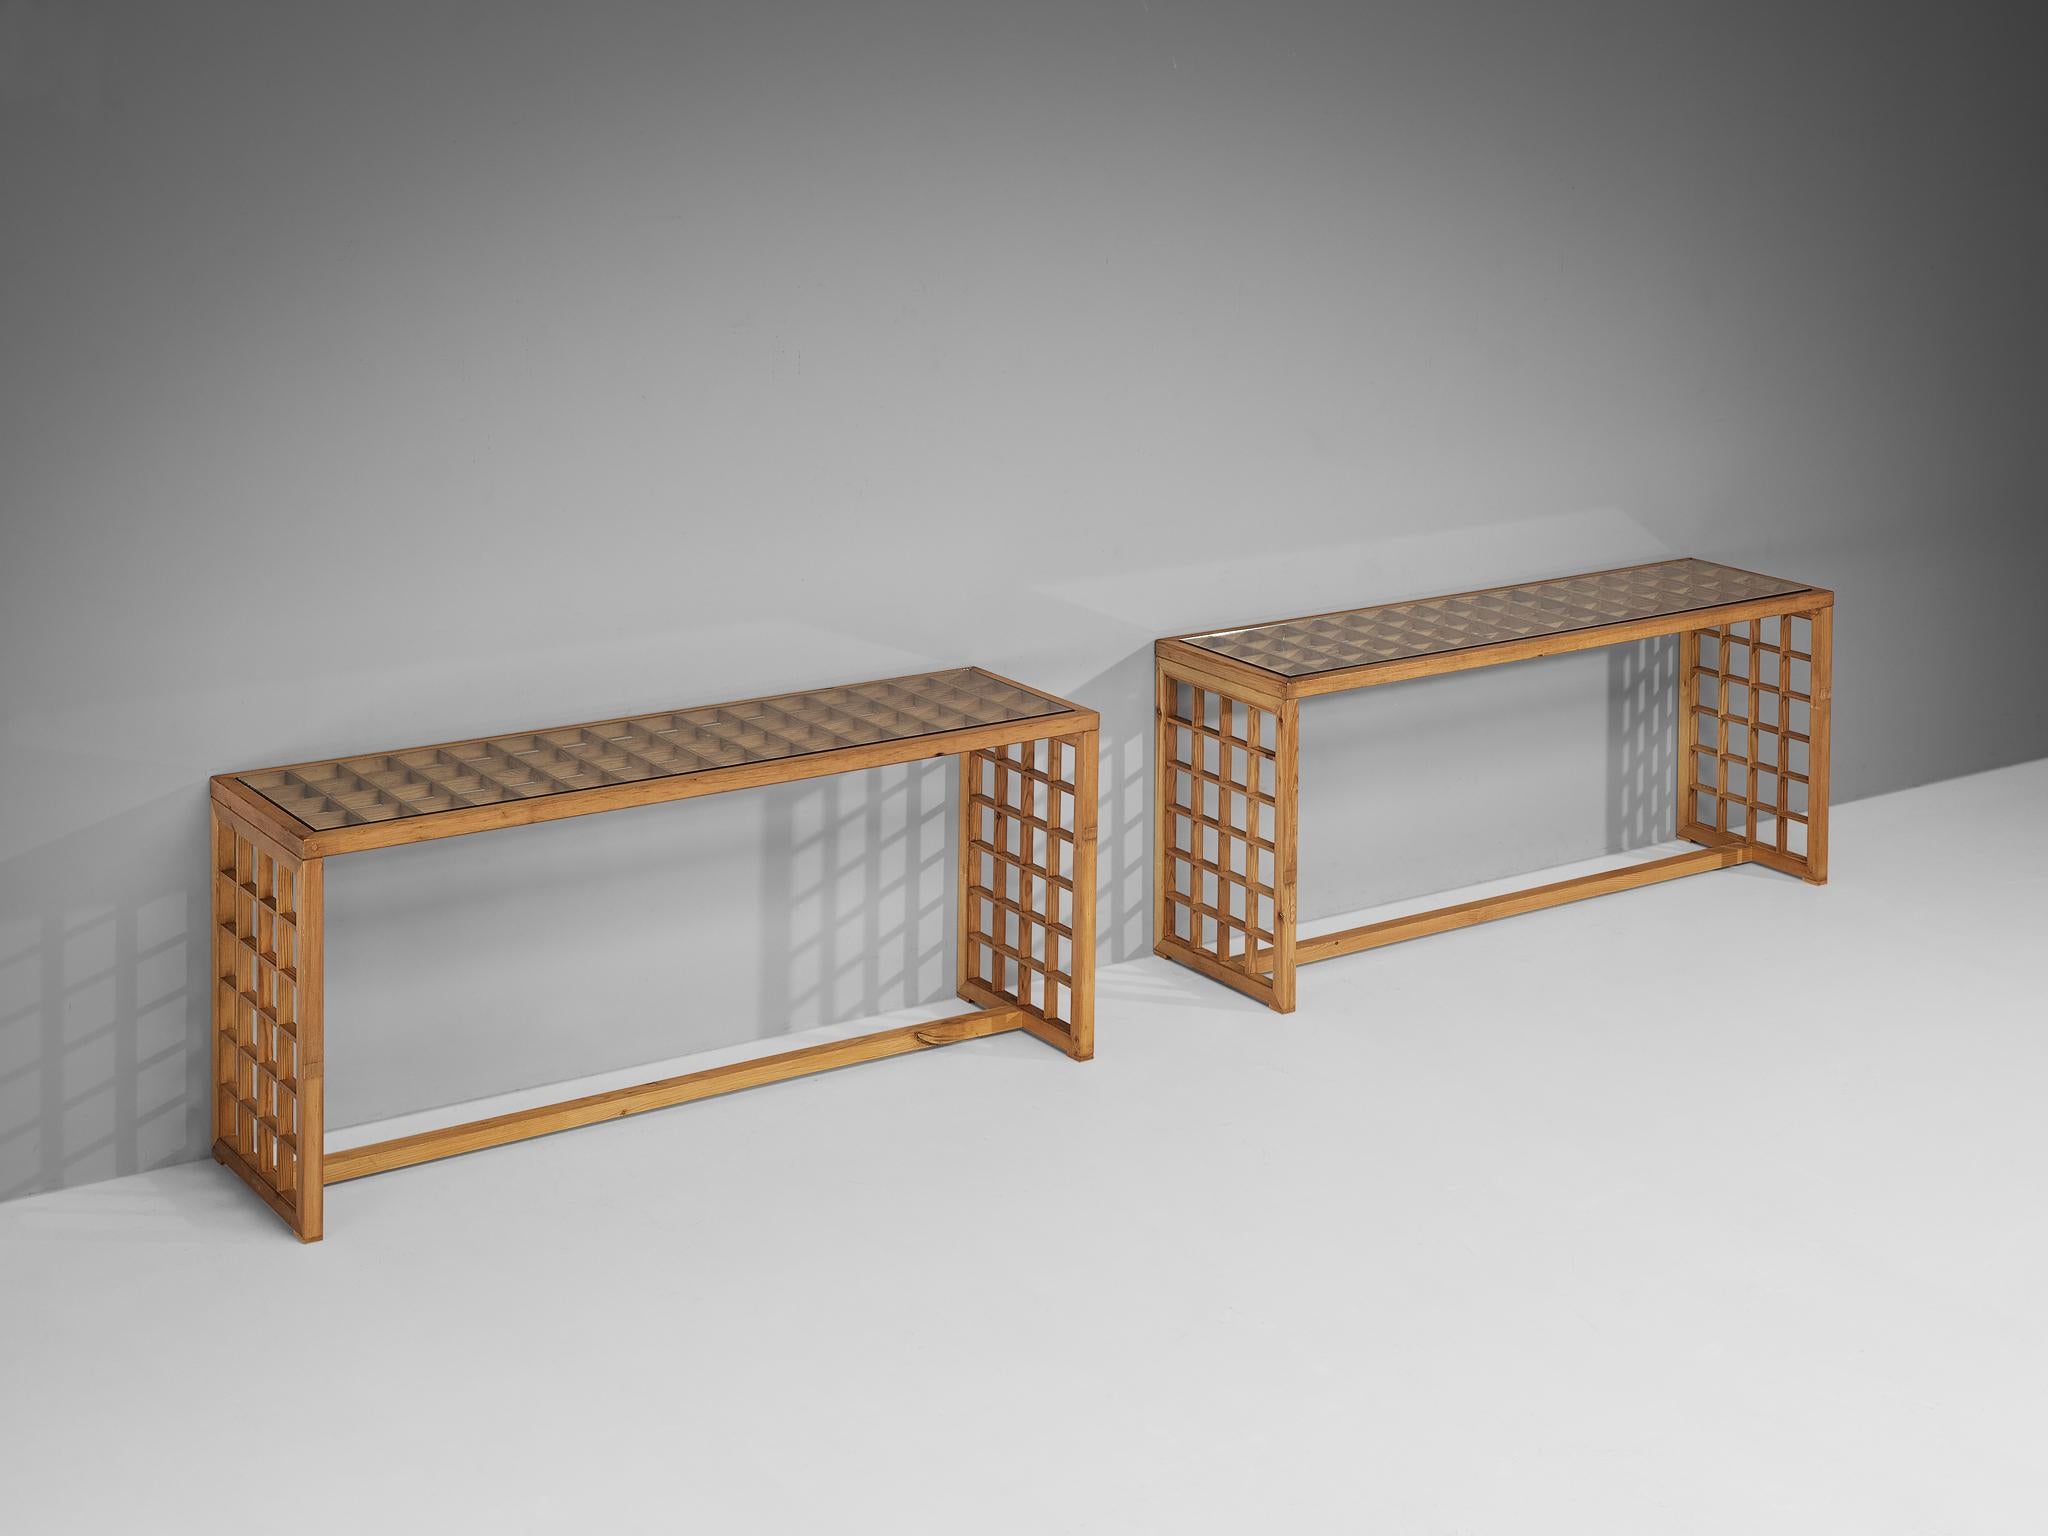 Consoles, pine, tinted glass, Italy, 1970s

Italian pair of consoles executed in a natural pine wood, made in the 1970s. The framework is characterized by an open construction with evenly spaced square openings that add a graphic and structural